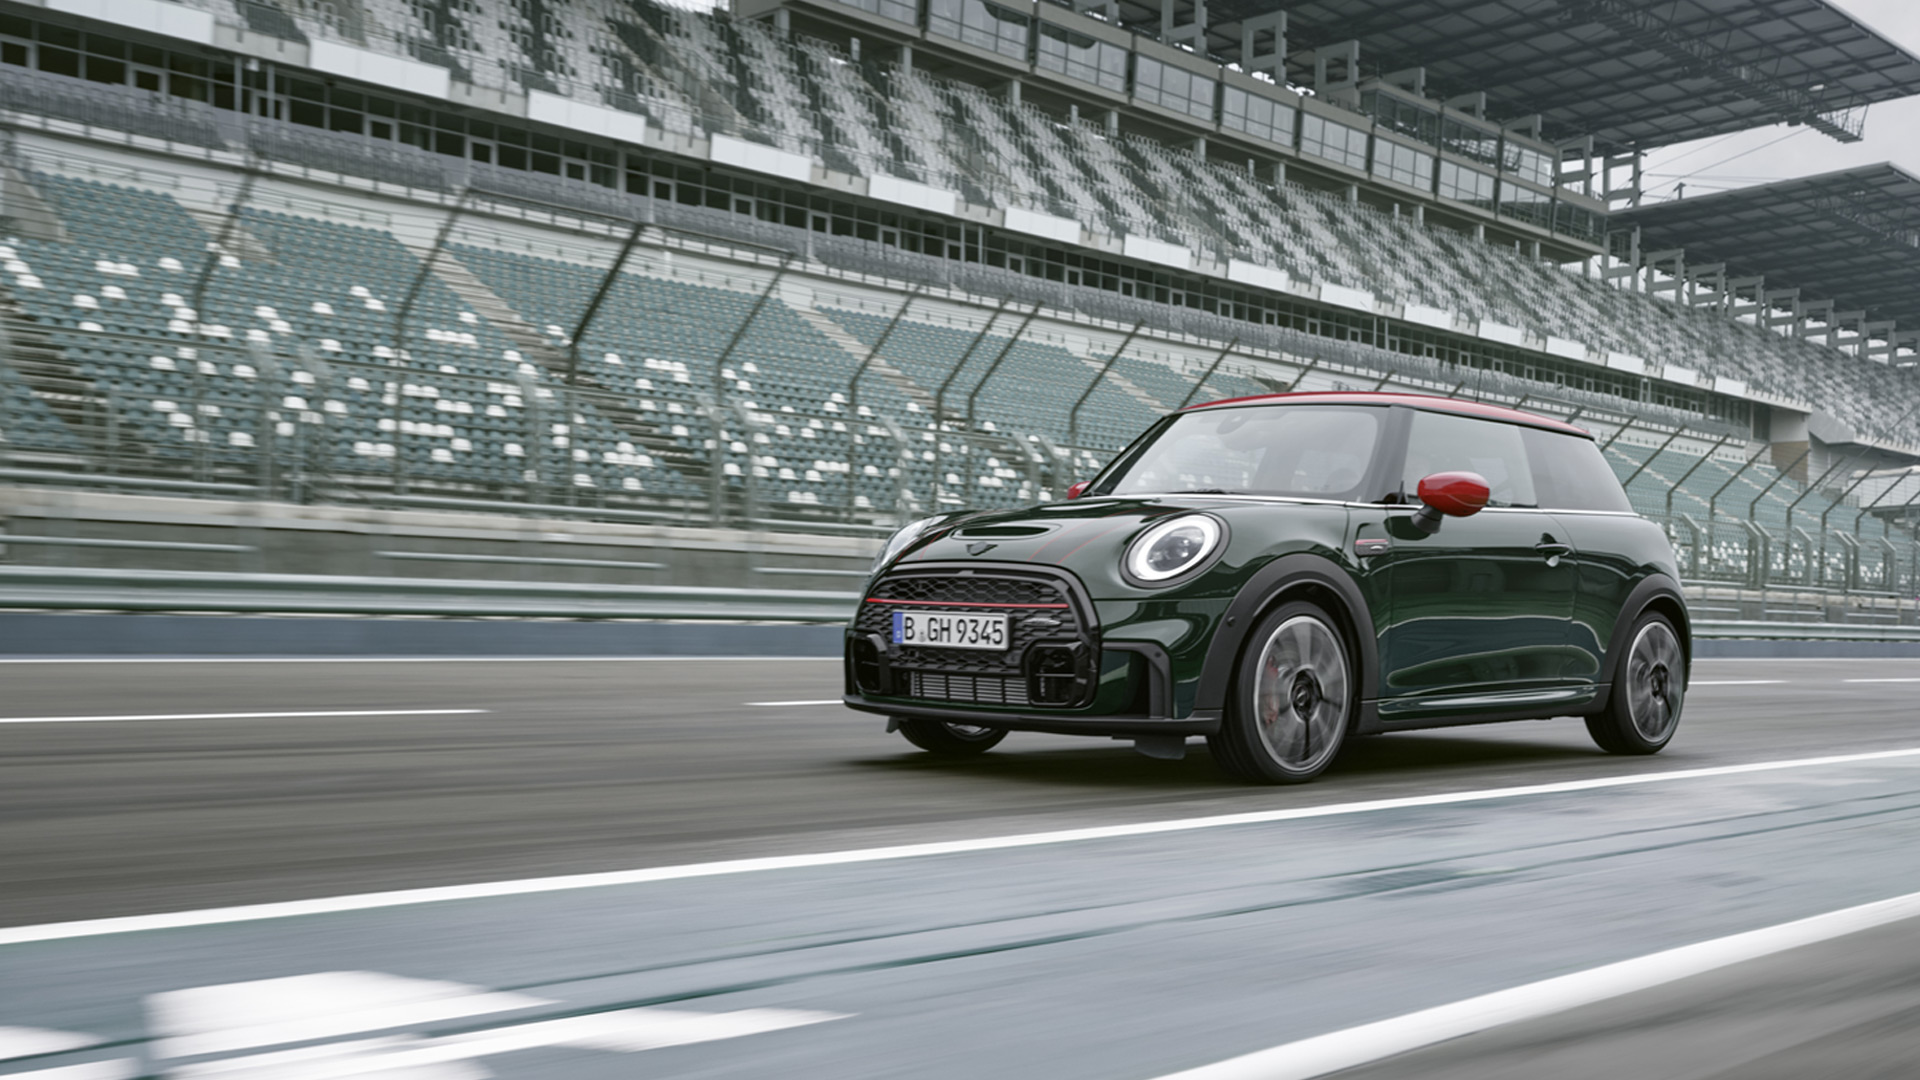 MINI JOHN COOPER WORKS – front view – grey and black